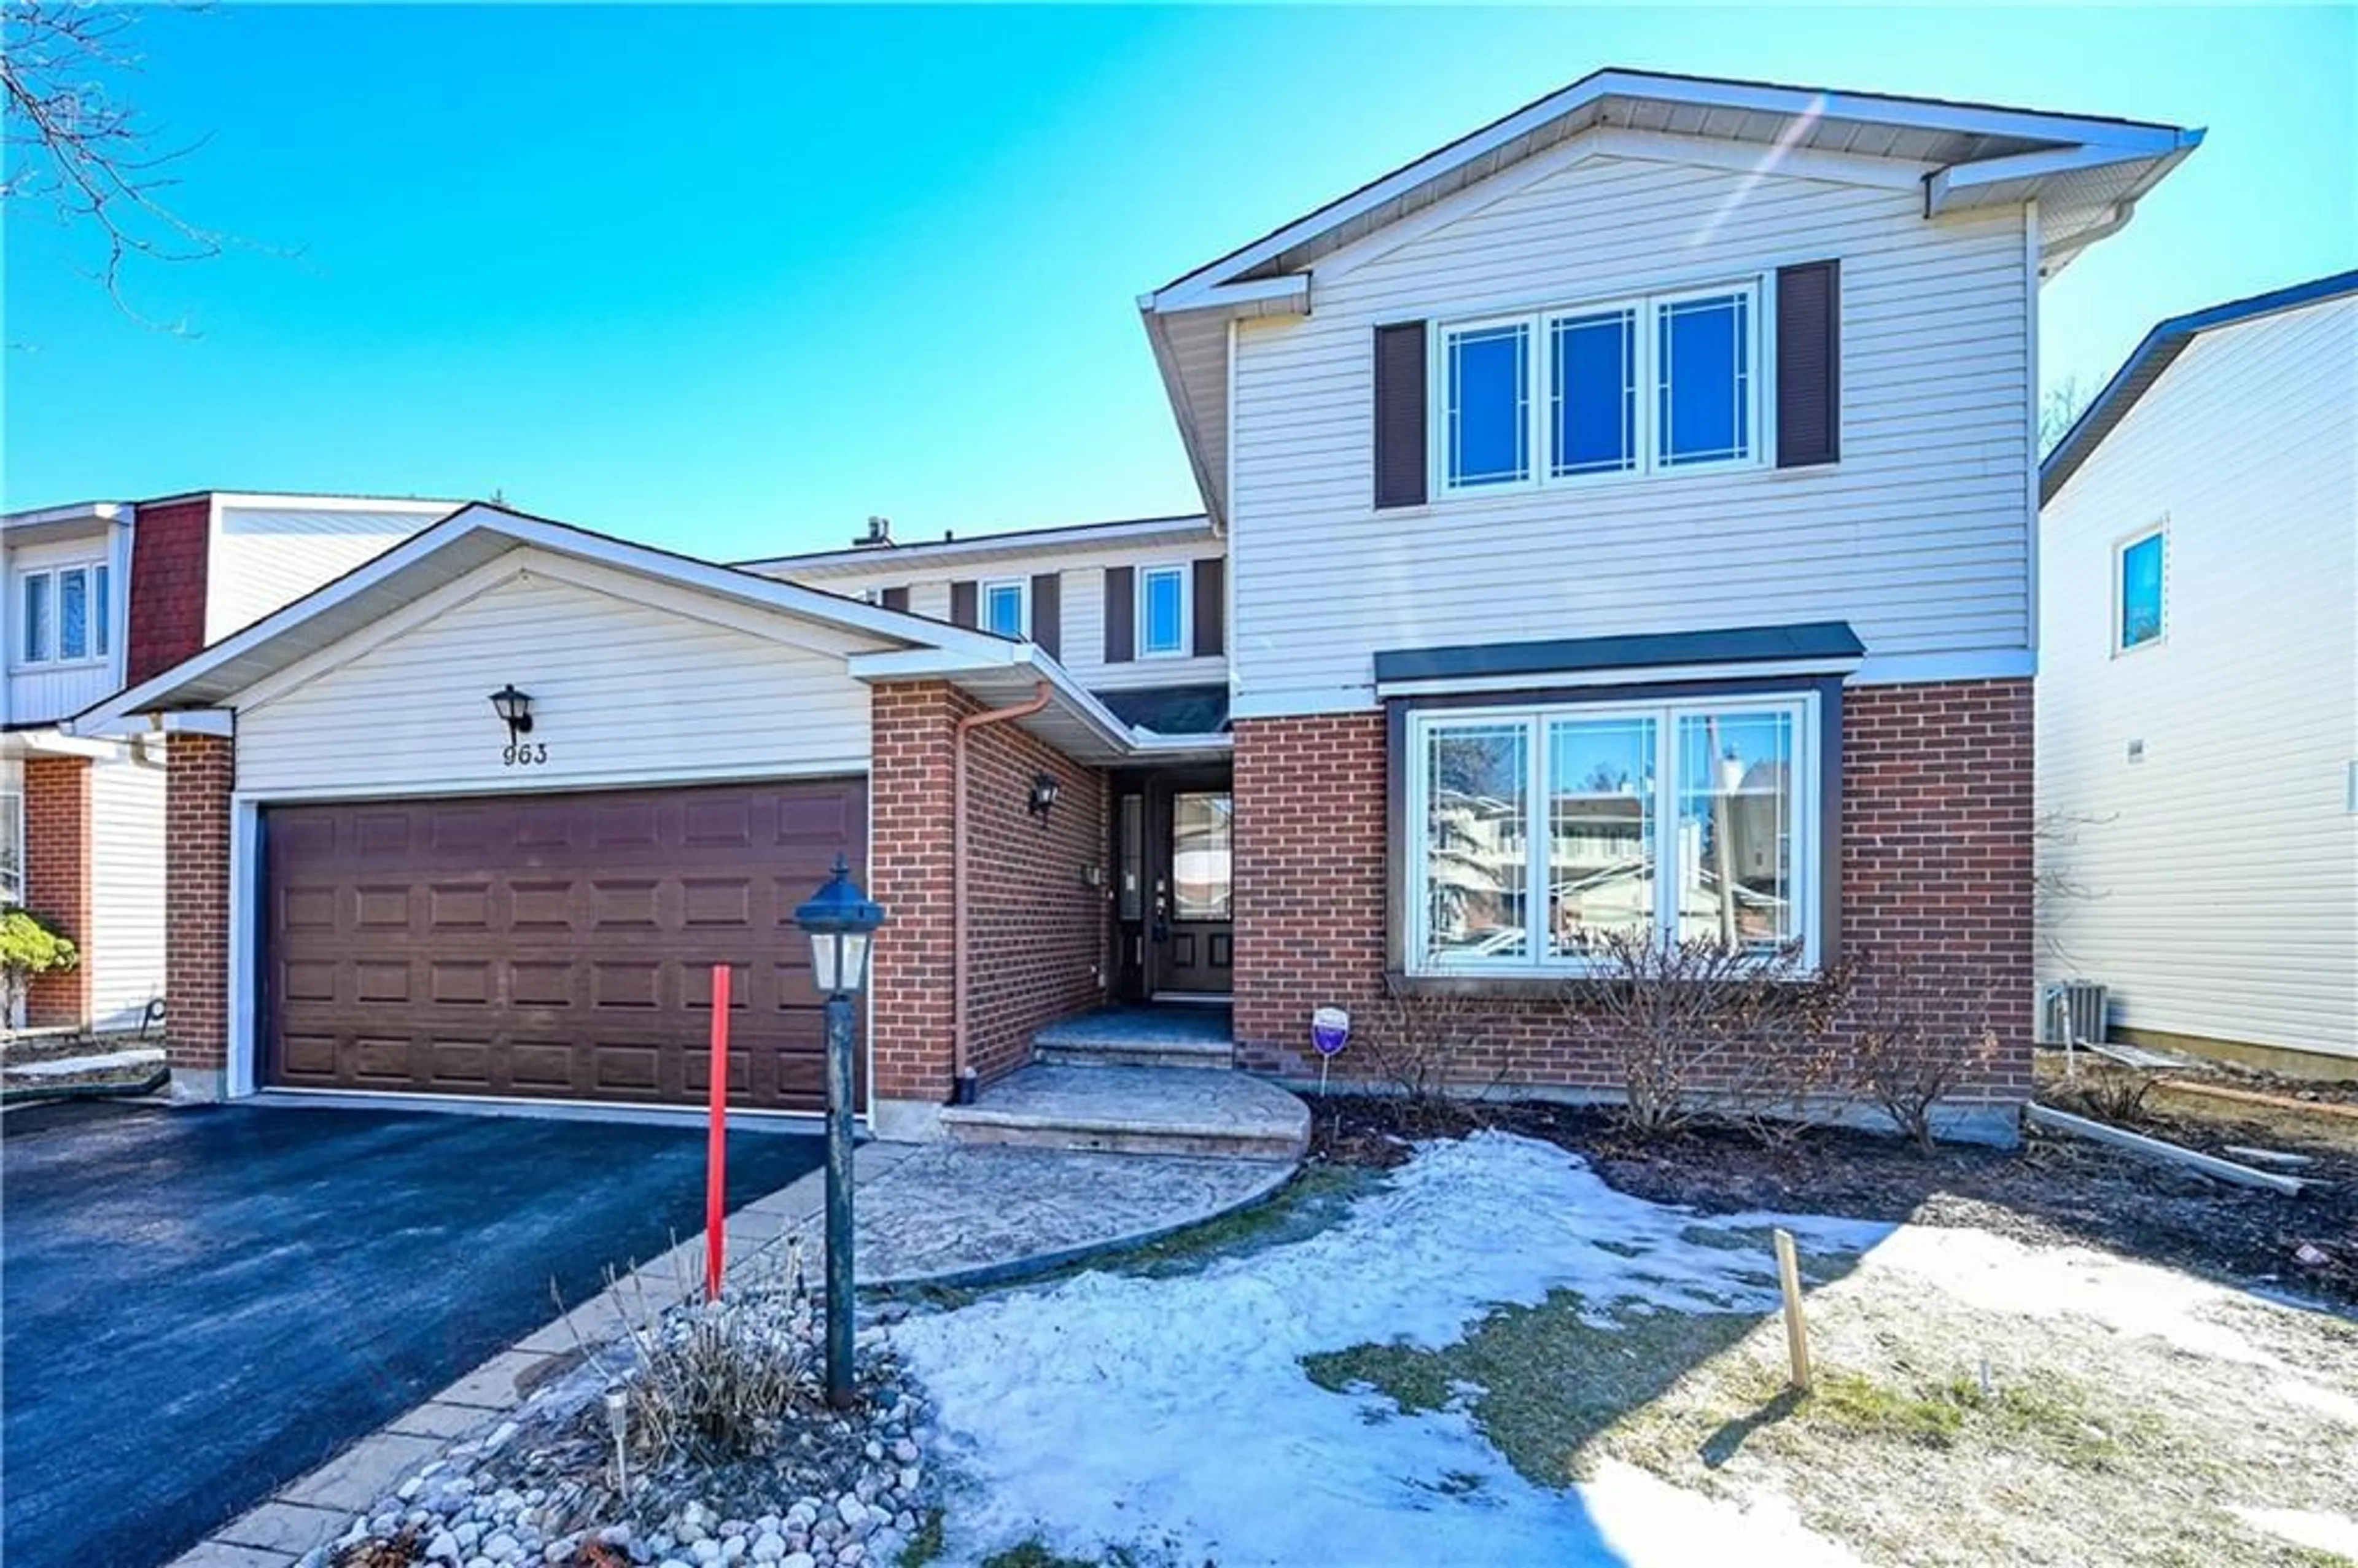 Home with brick exterior material for 963 CHALEUR Way, Ottawa Ontario K1C 2R9